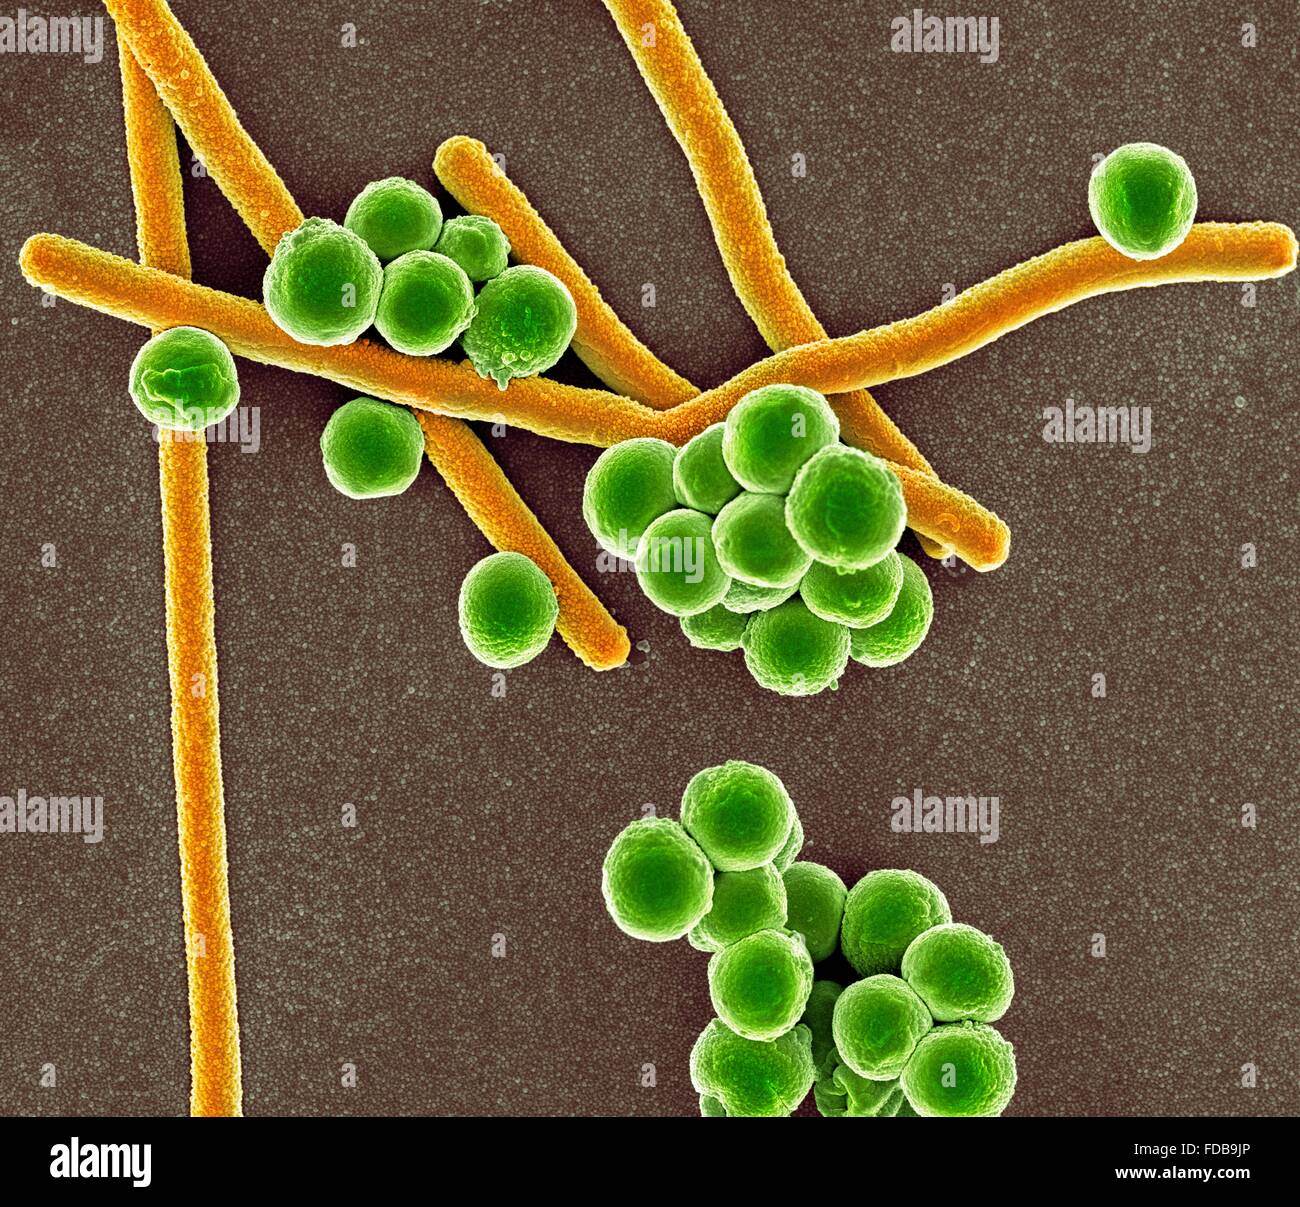 Coloured scanning electron micrograph (SEM) of rod-shaped (bacillus) and round (coccus) bacteria. Stock Photo